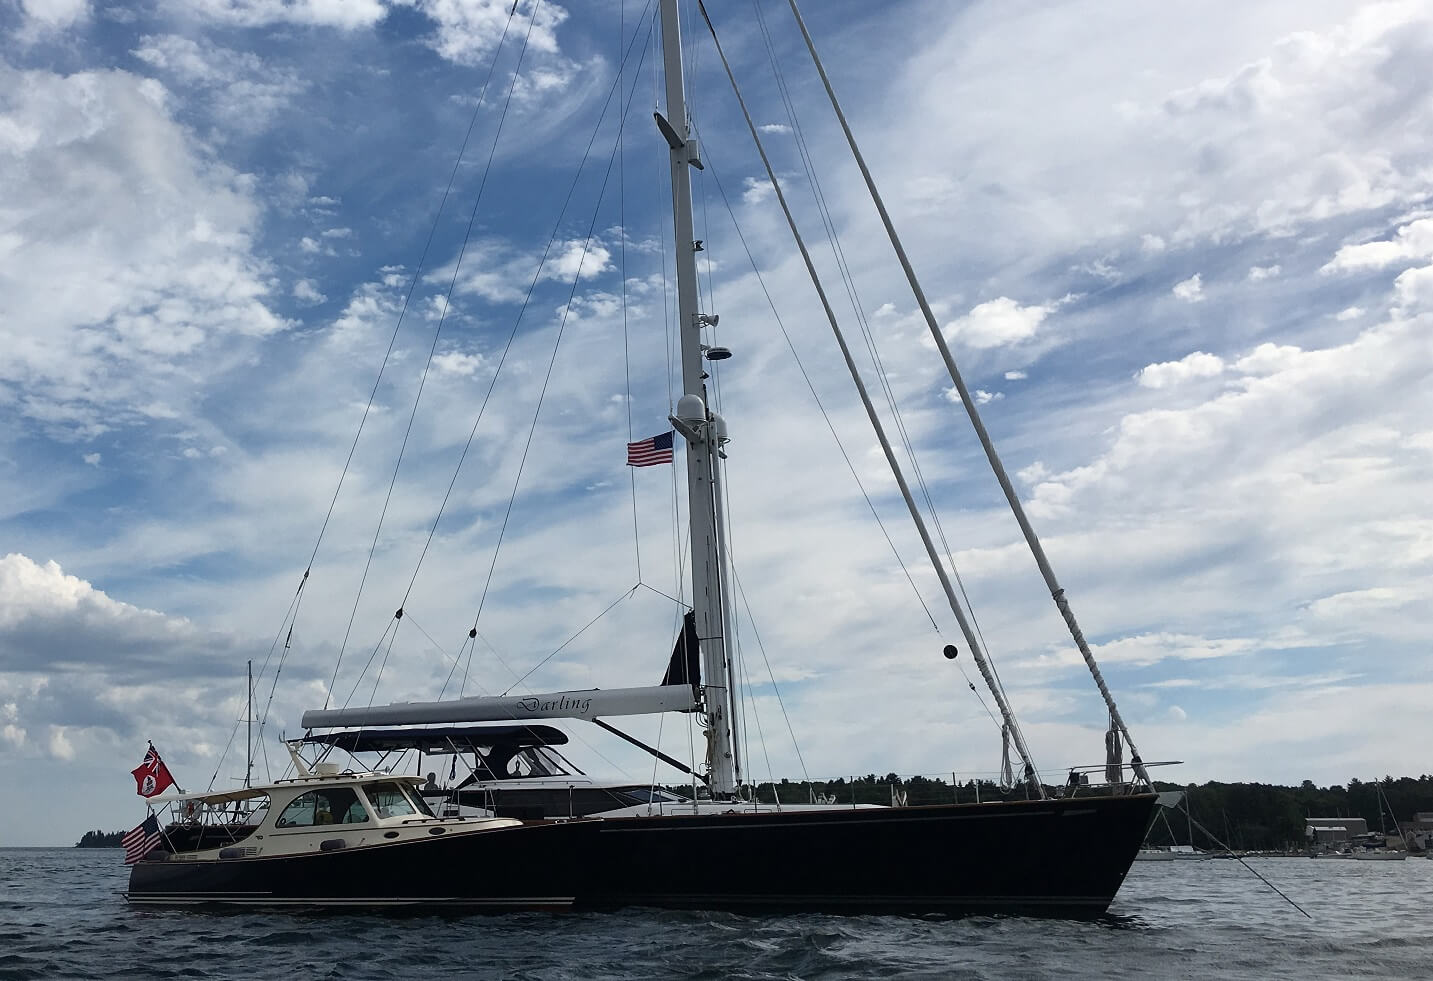 lifting keel yachts for sale